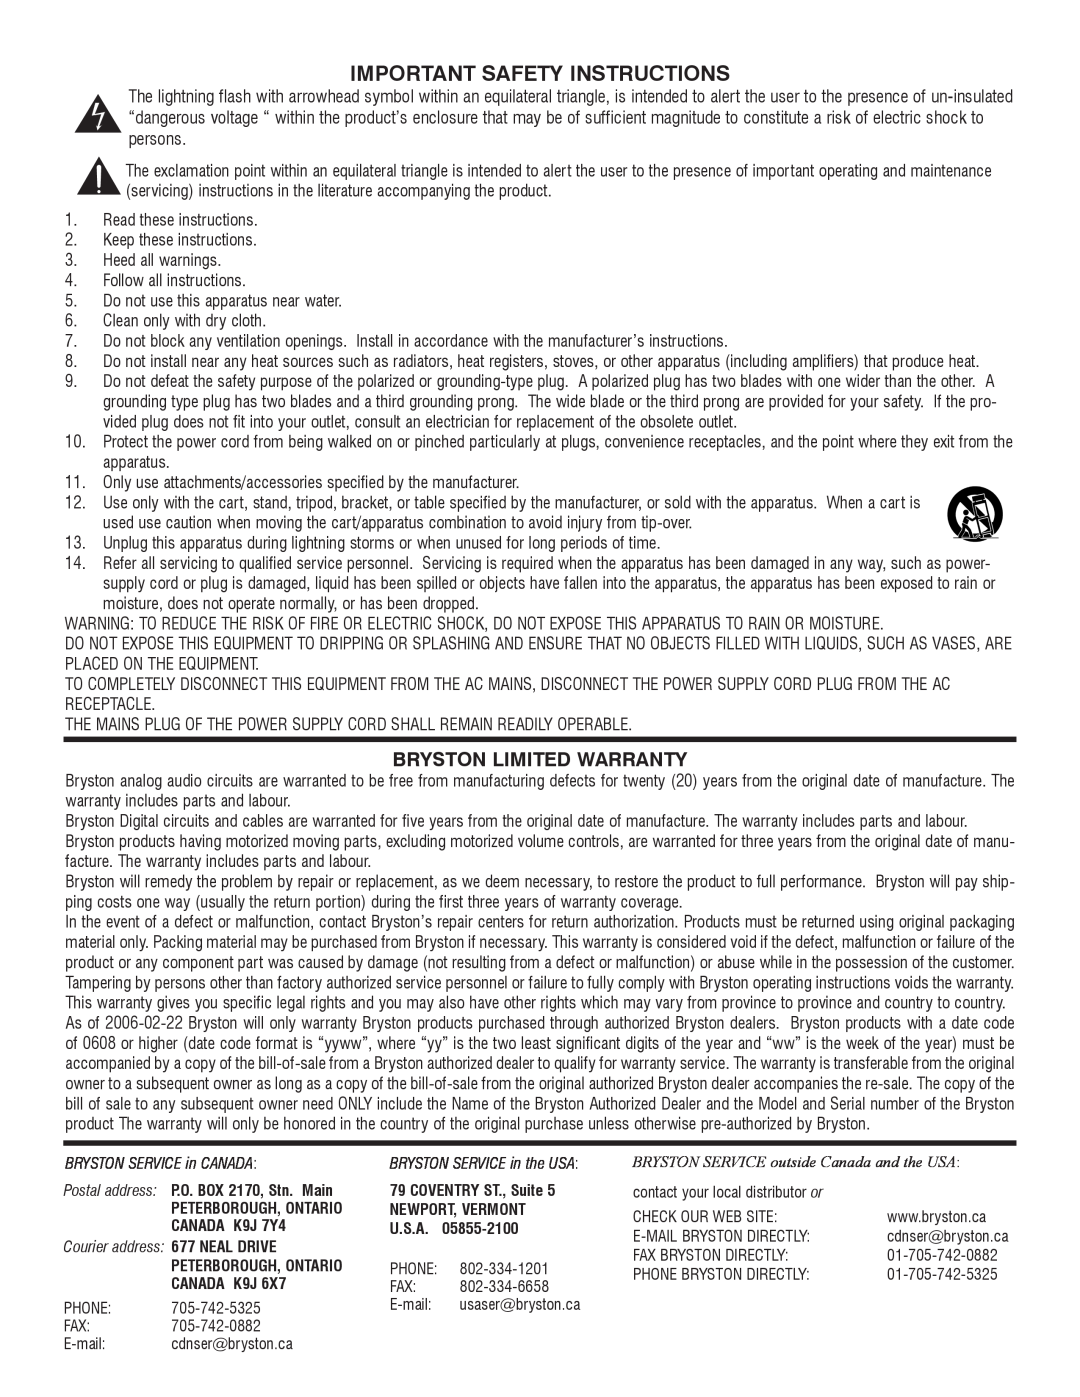 Bryston 2BSST owner manual Important Safety Instructions, Bryston Limited Warranty 